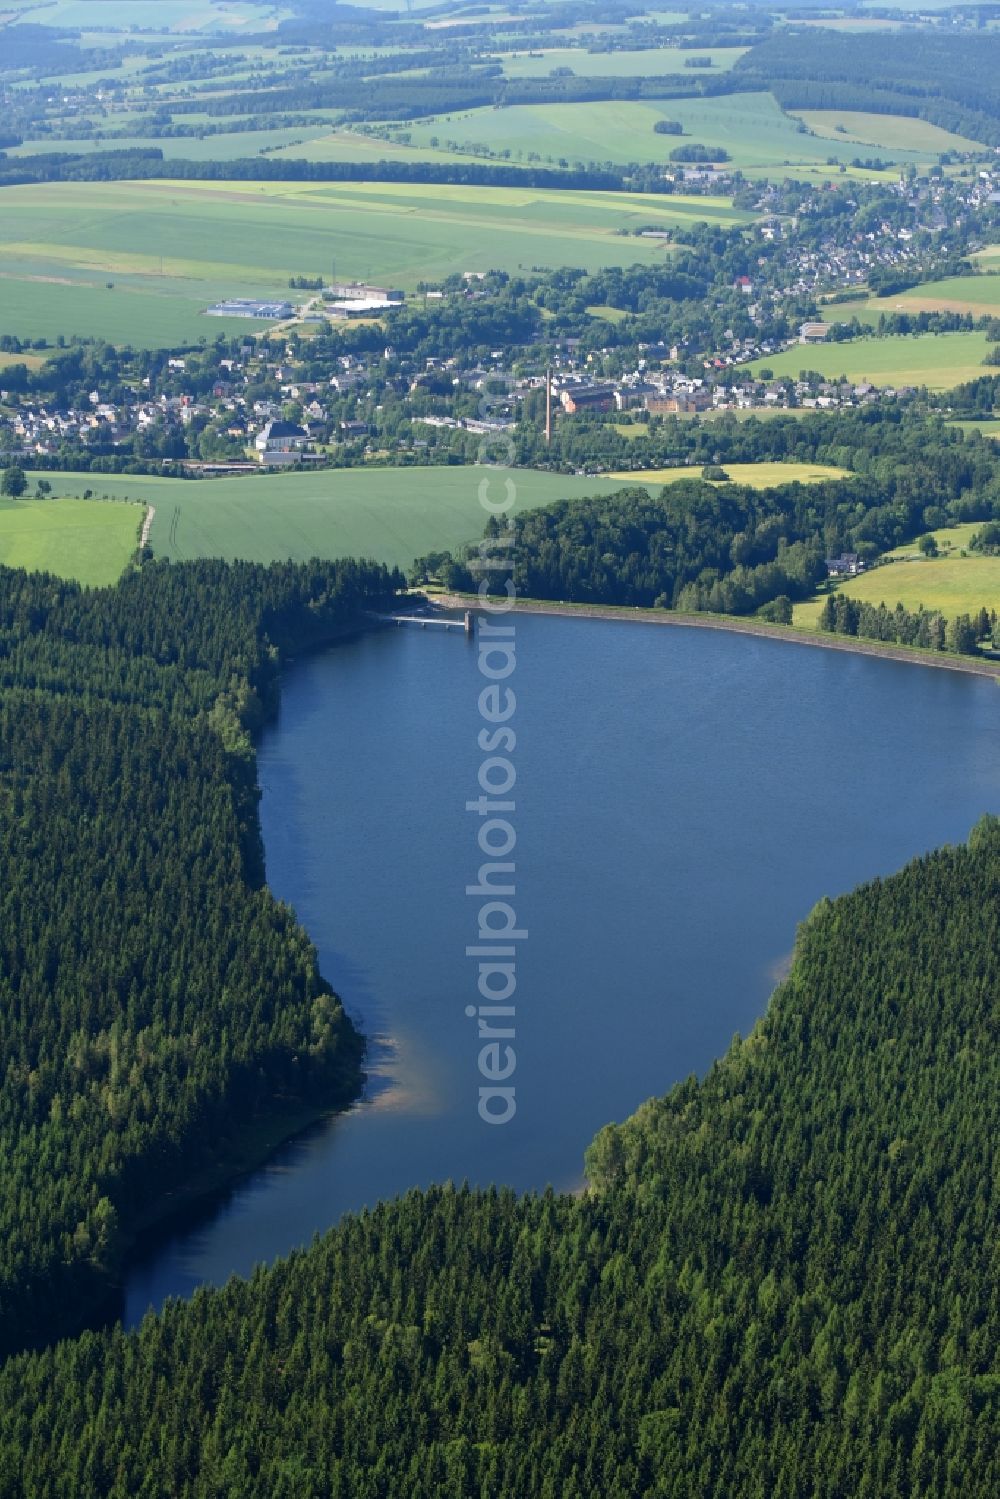 Sehmatal from above - Dam and shore areas at the lake Cranzahl in Sehmatal in the state Saxony, Germany